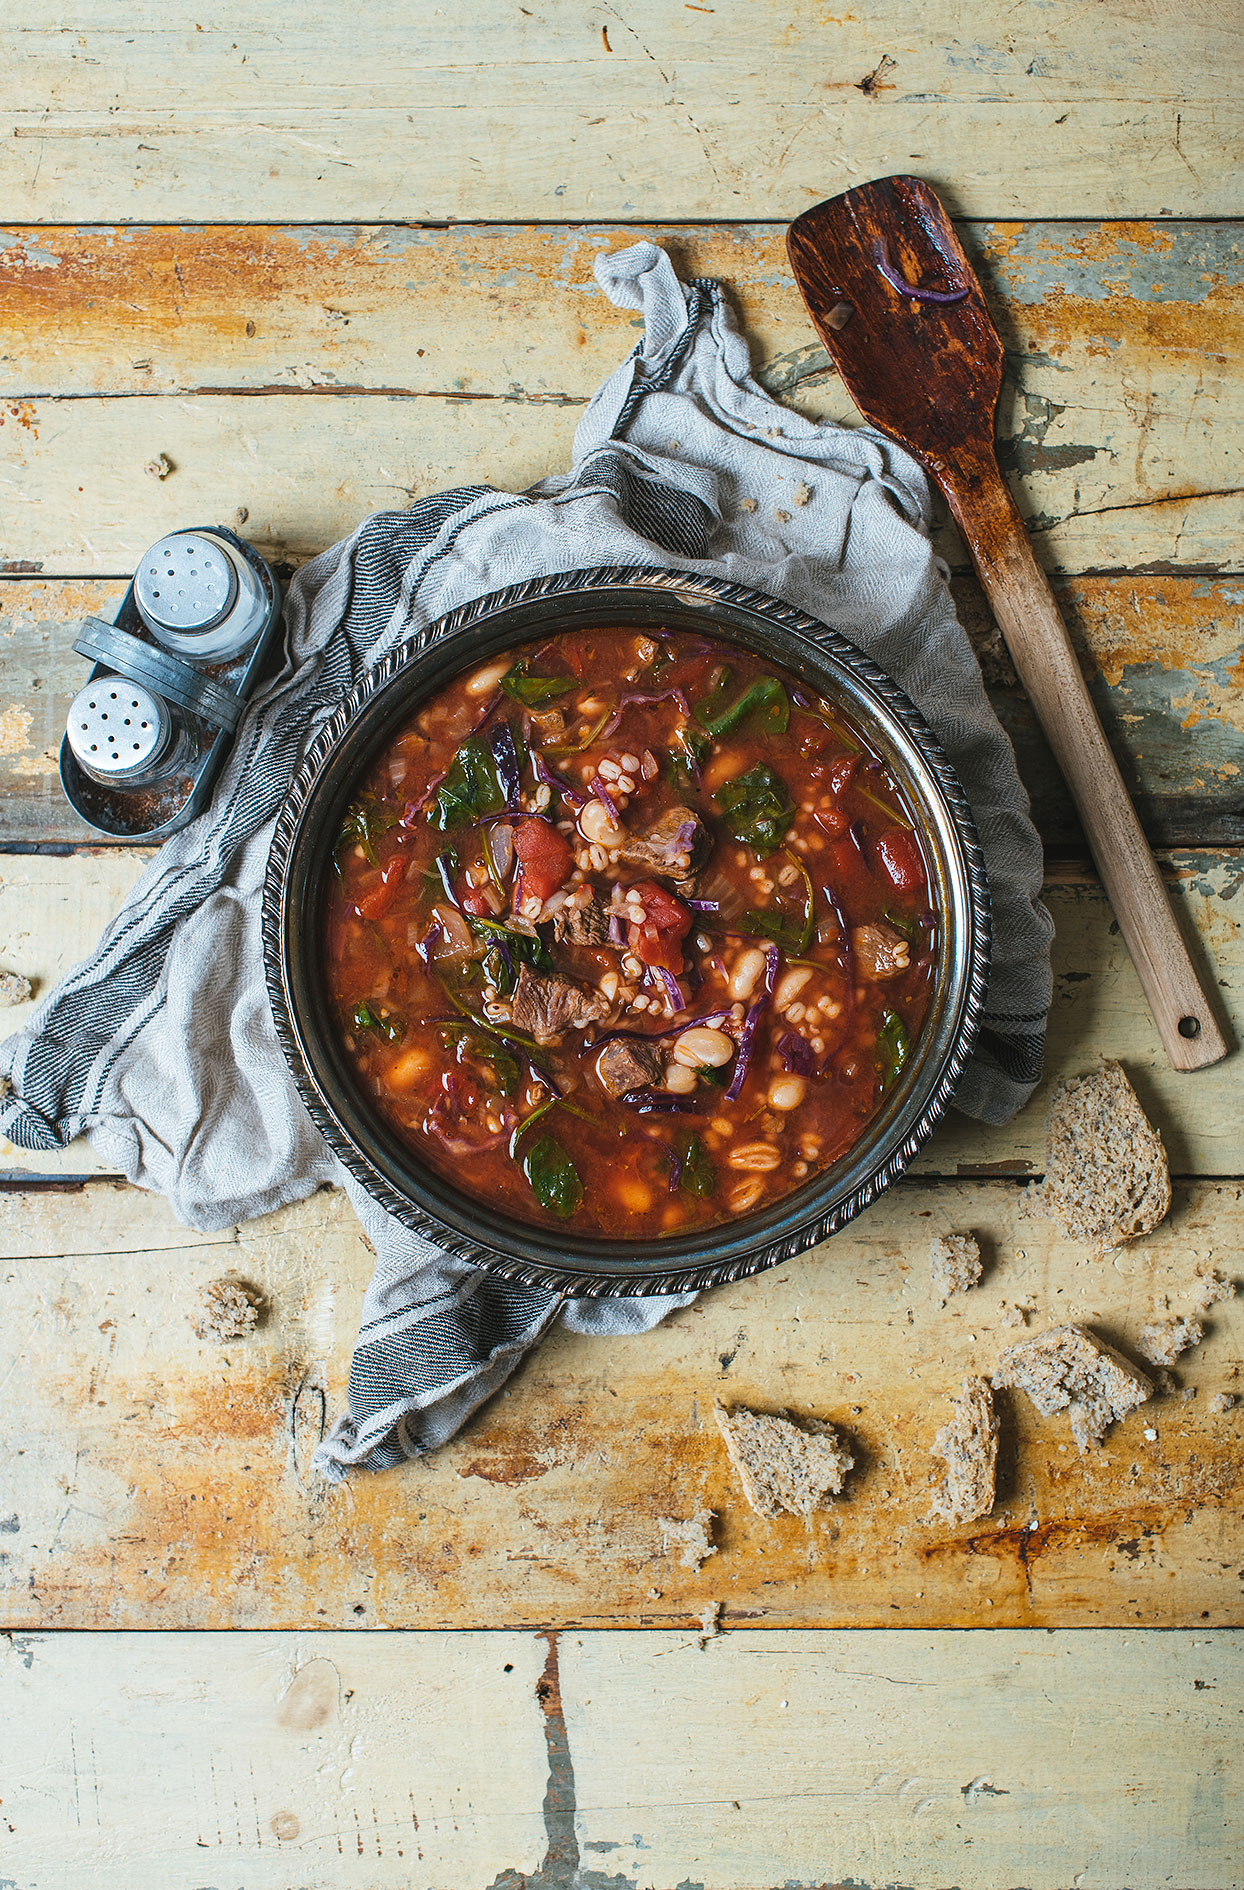 Tuscan soup with beef, vegetables and red ale beer